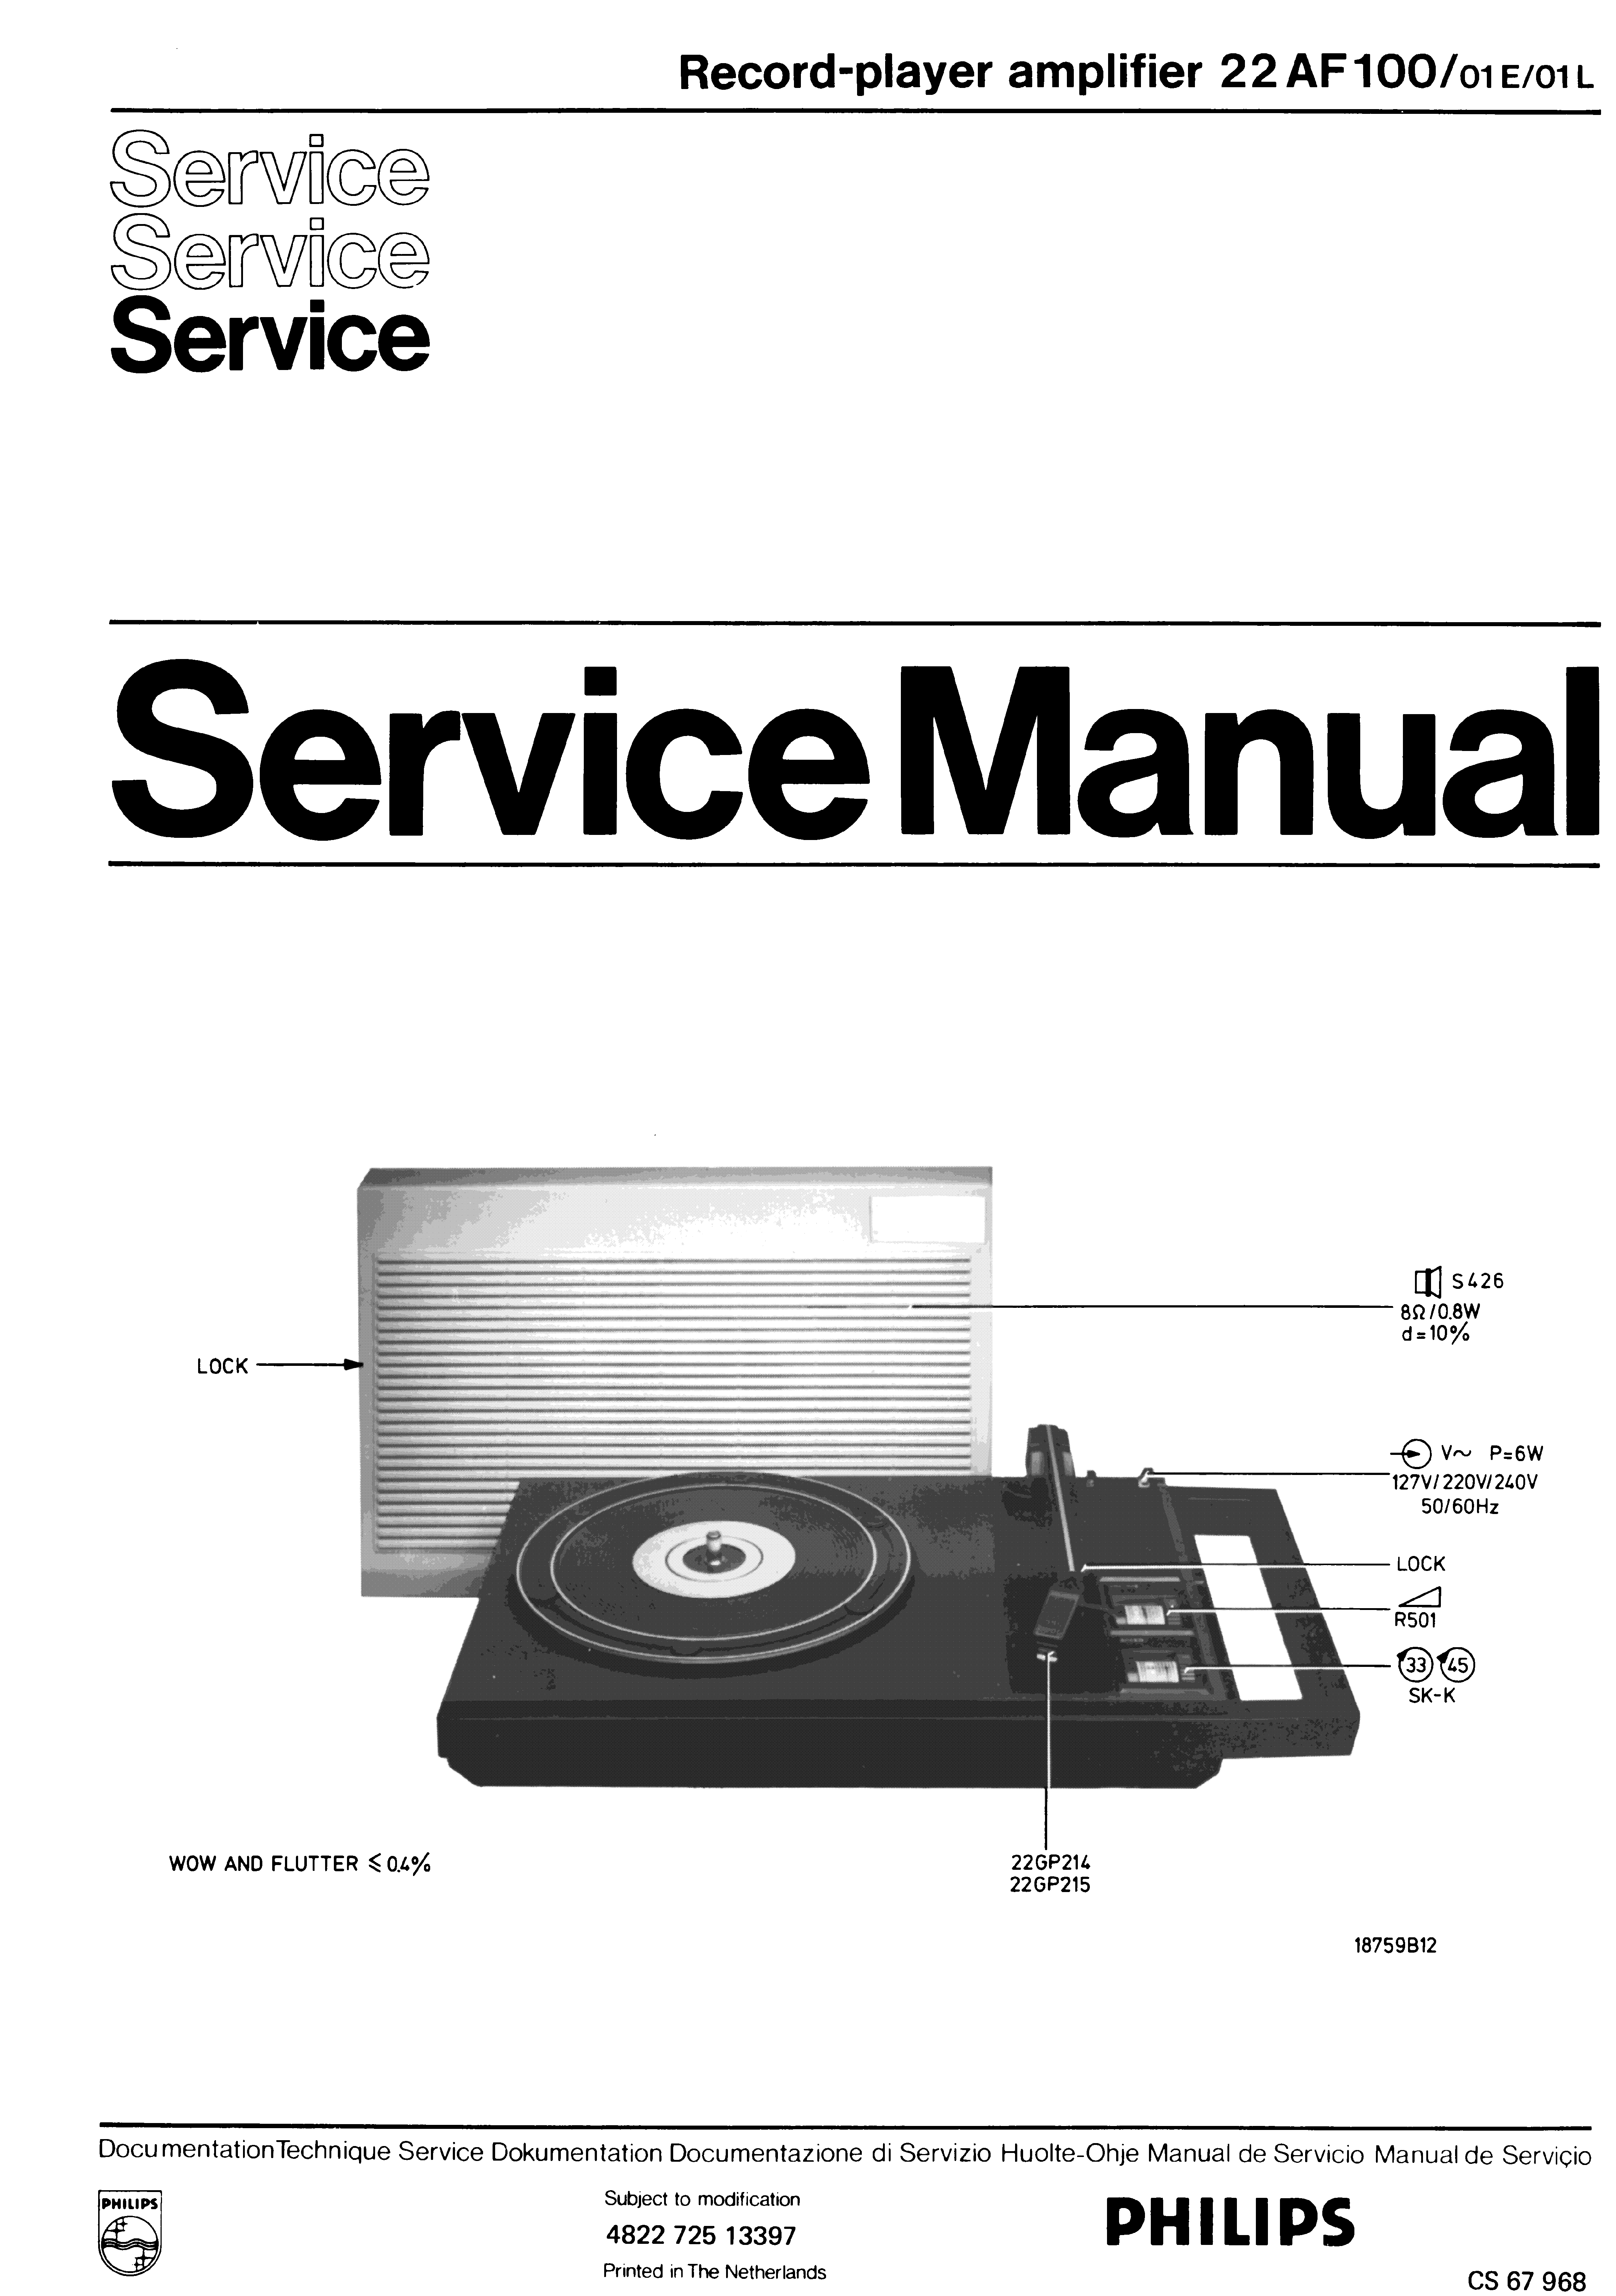 PHILIPS 22AF100 RECORD-PLAYER AMPLIFIER SM service manual (1st page)